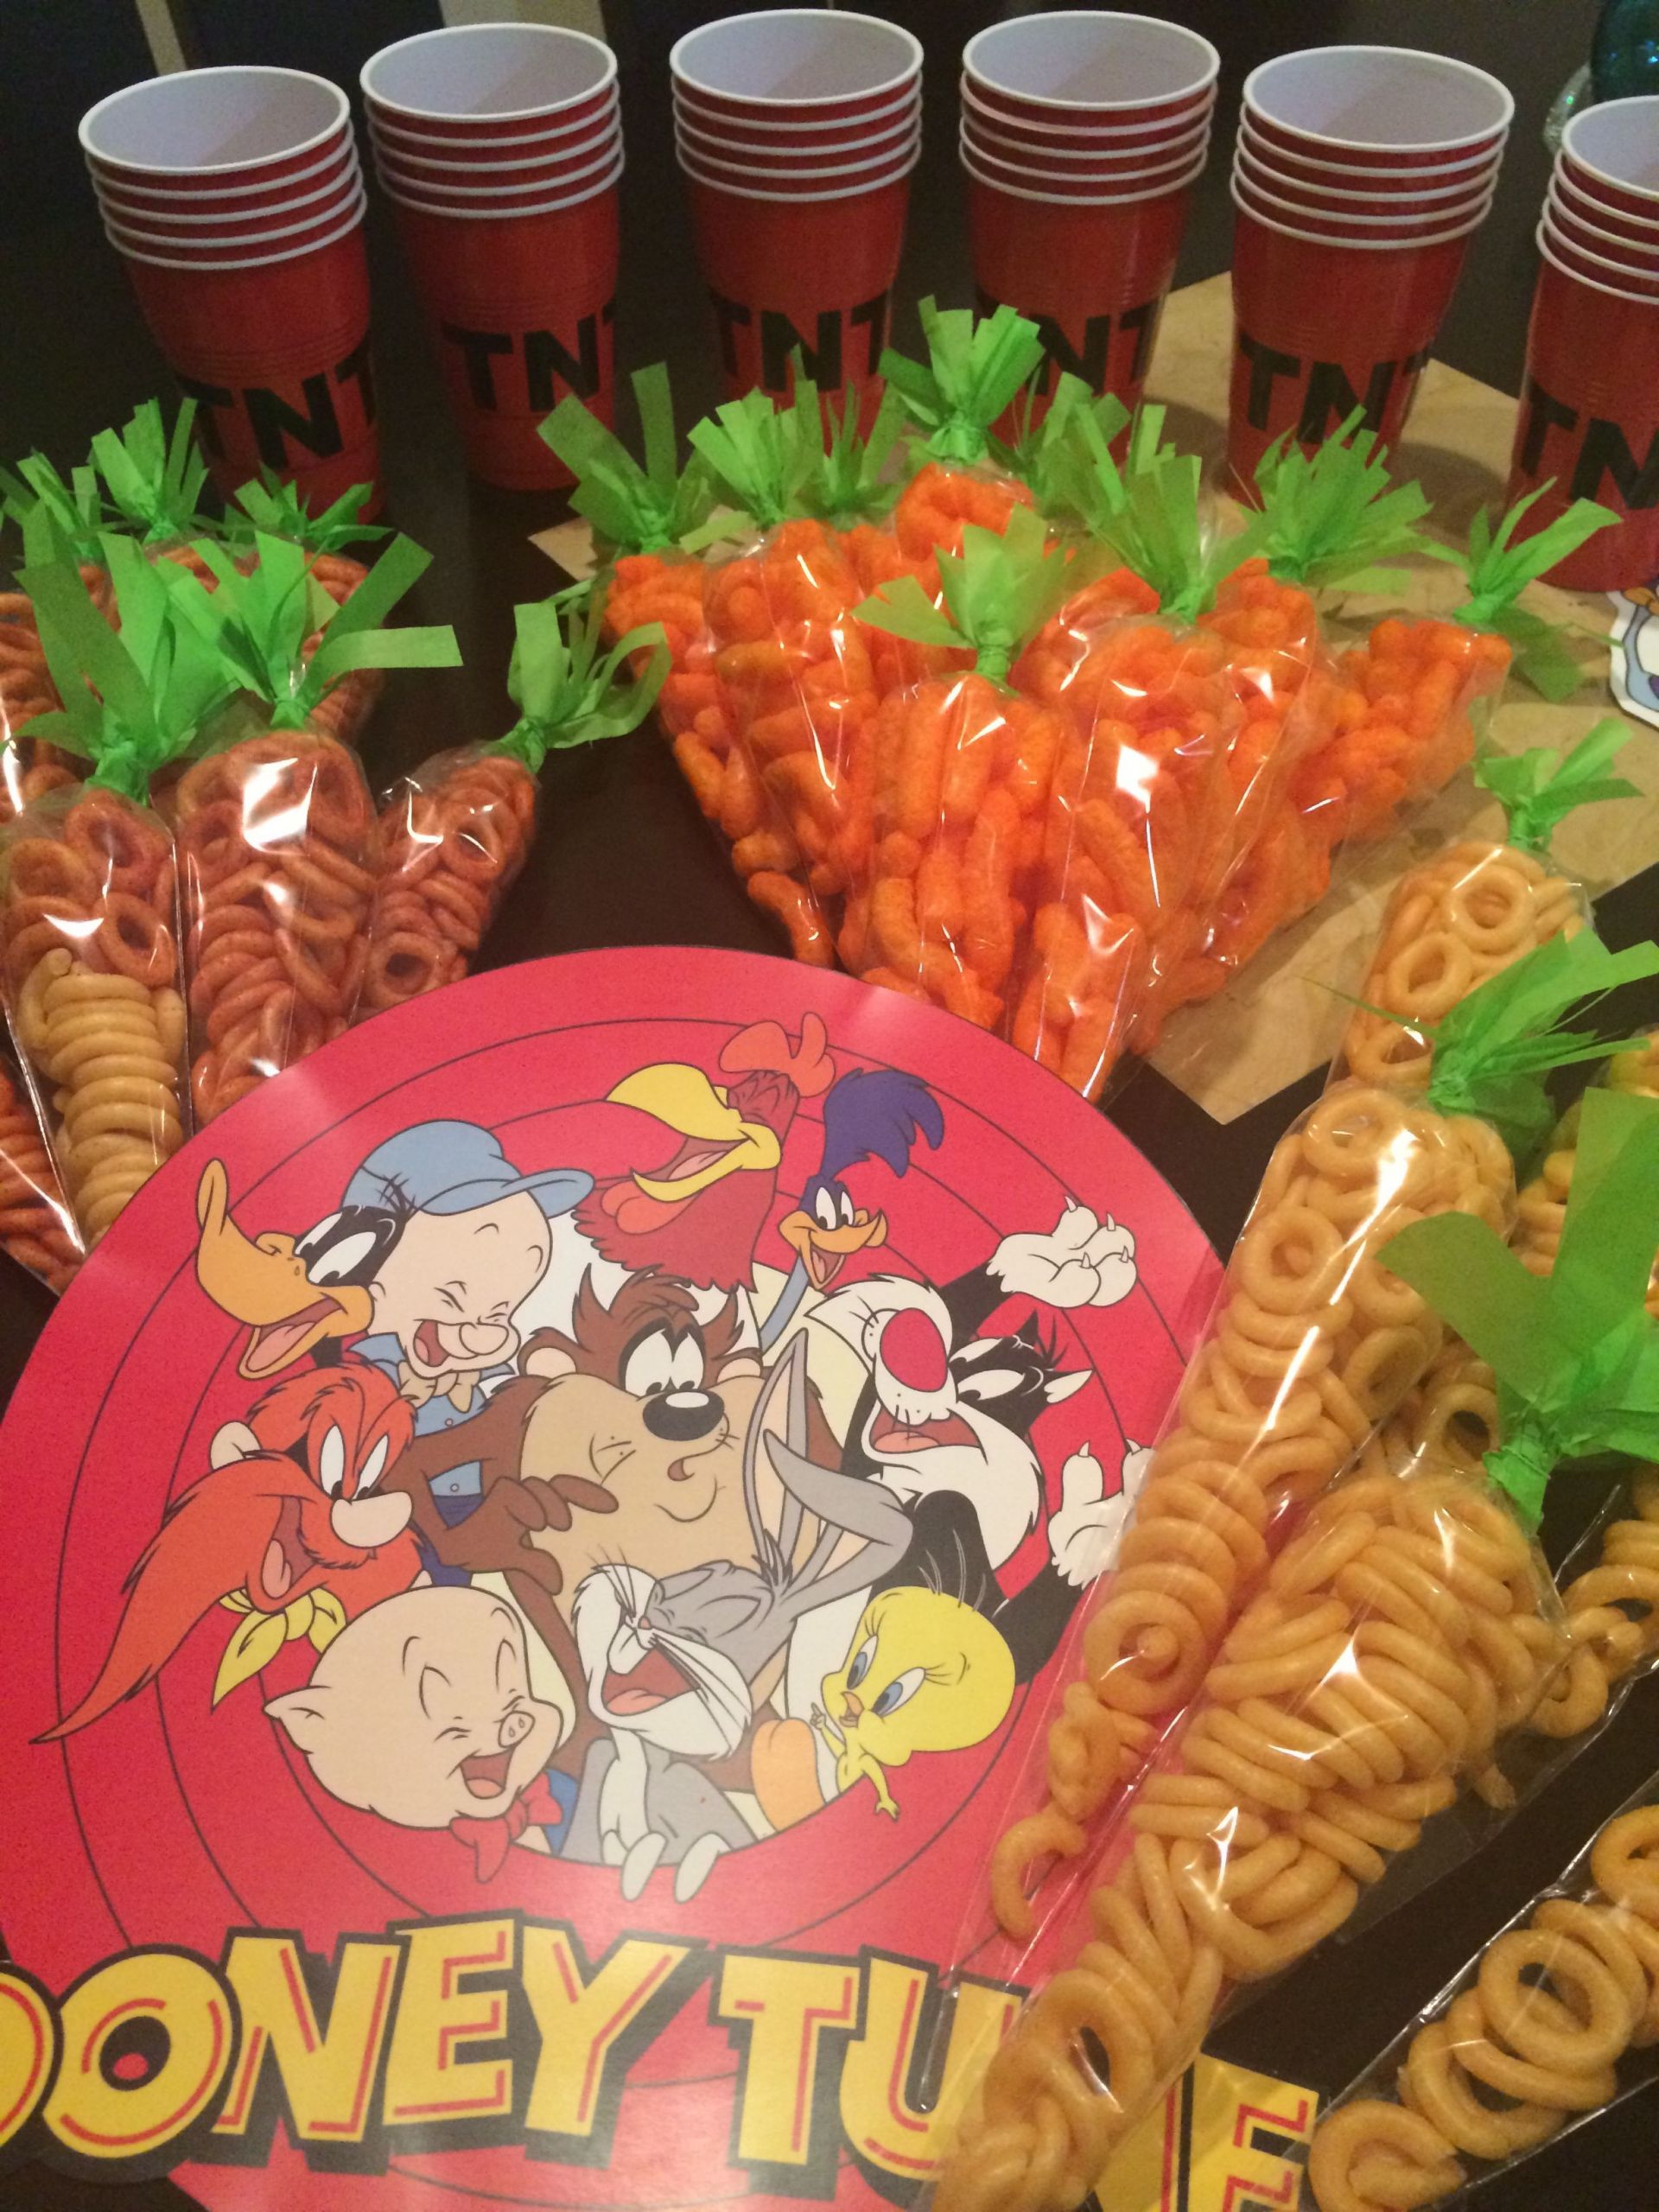 Baby Looney Tunes Party Decorations
 Looney Tunes Party fill carrots with orange M&M or jelly